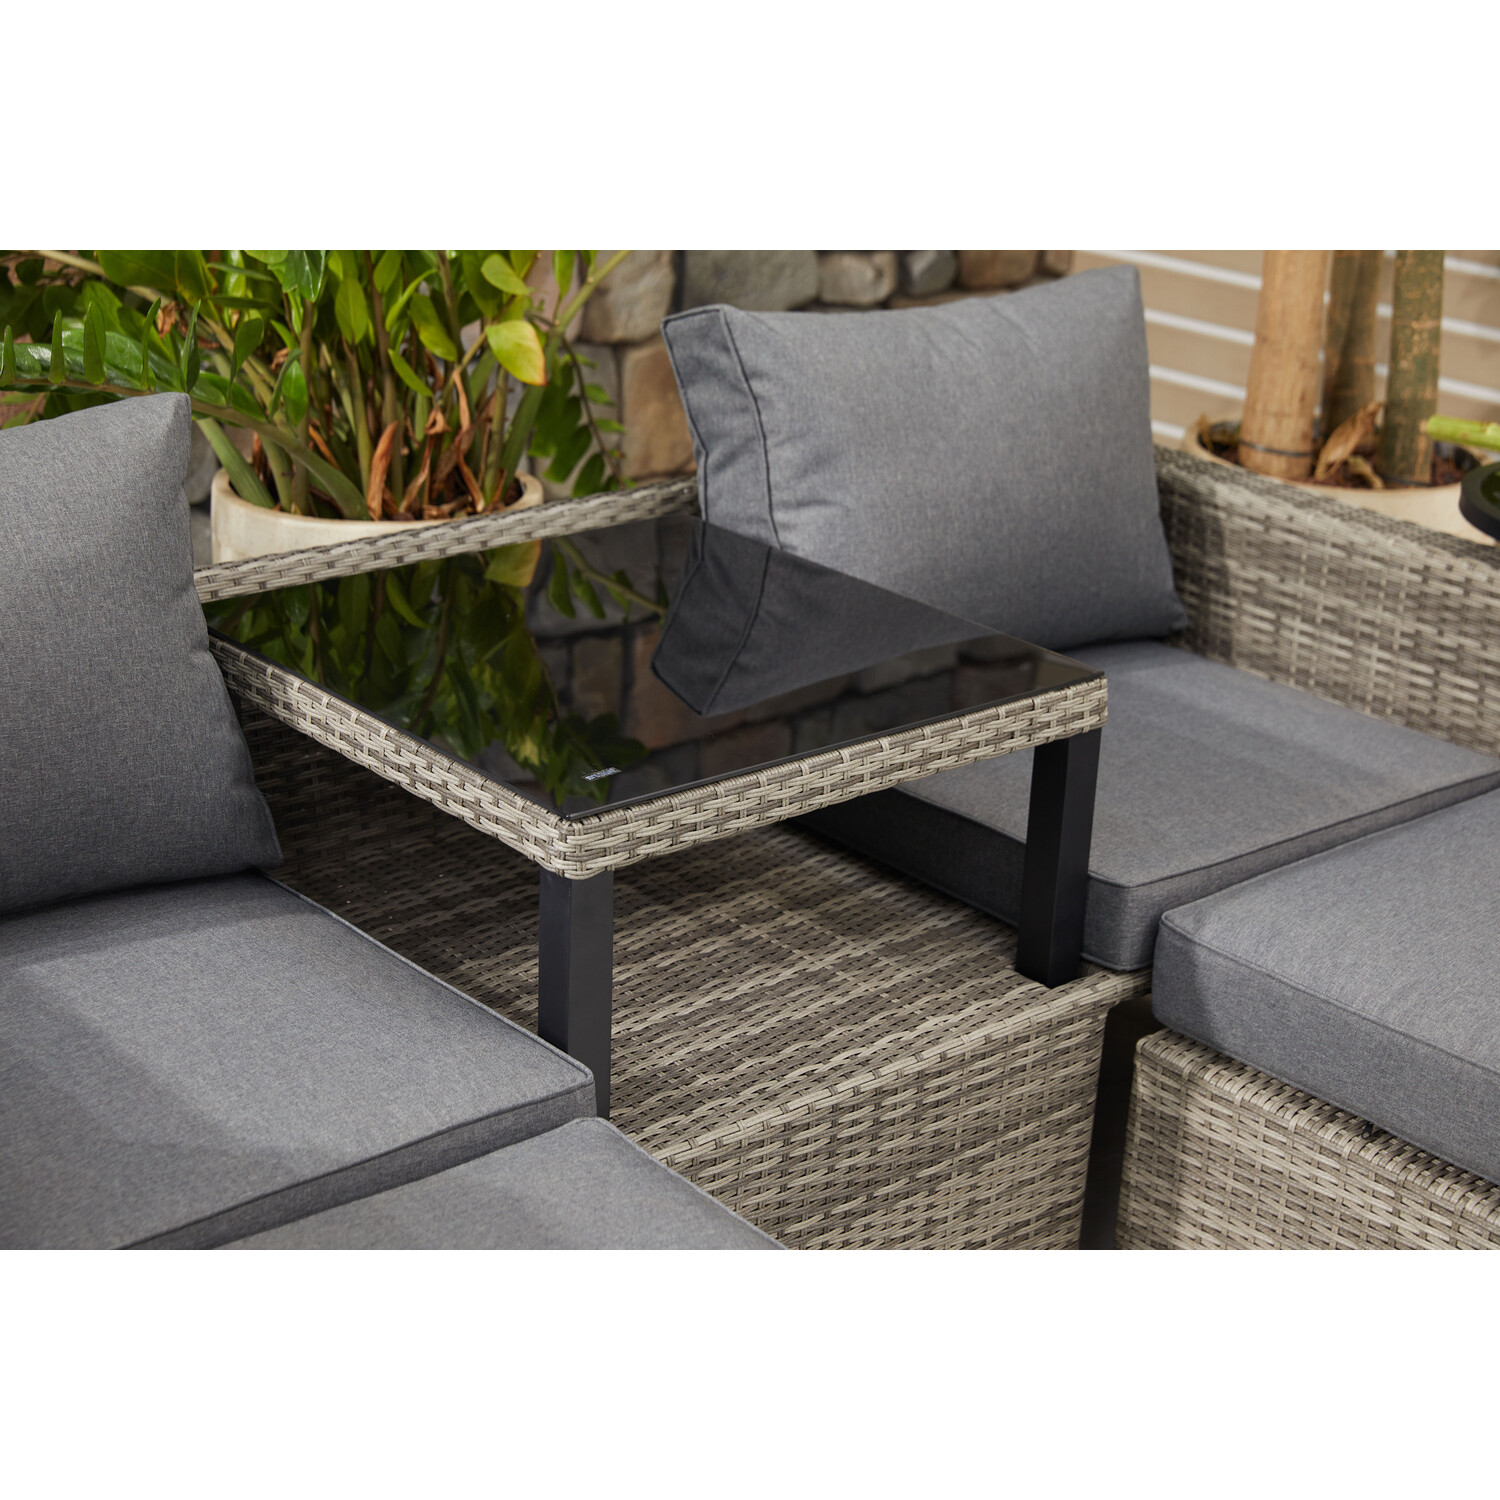 Malay Deluxe Malay New Hampshire 2 Seater Natural Transformer Patio Set Image 8